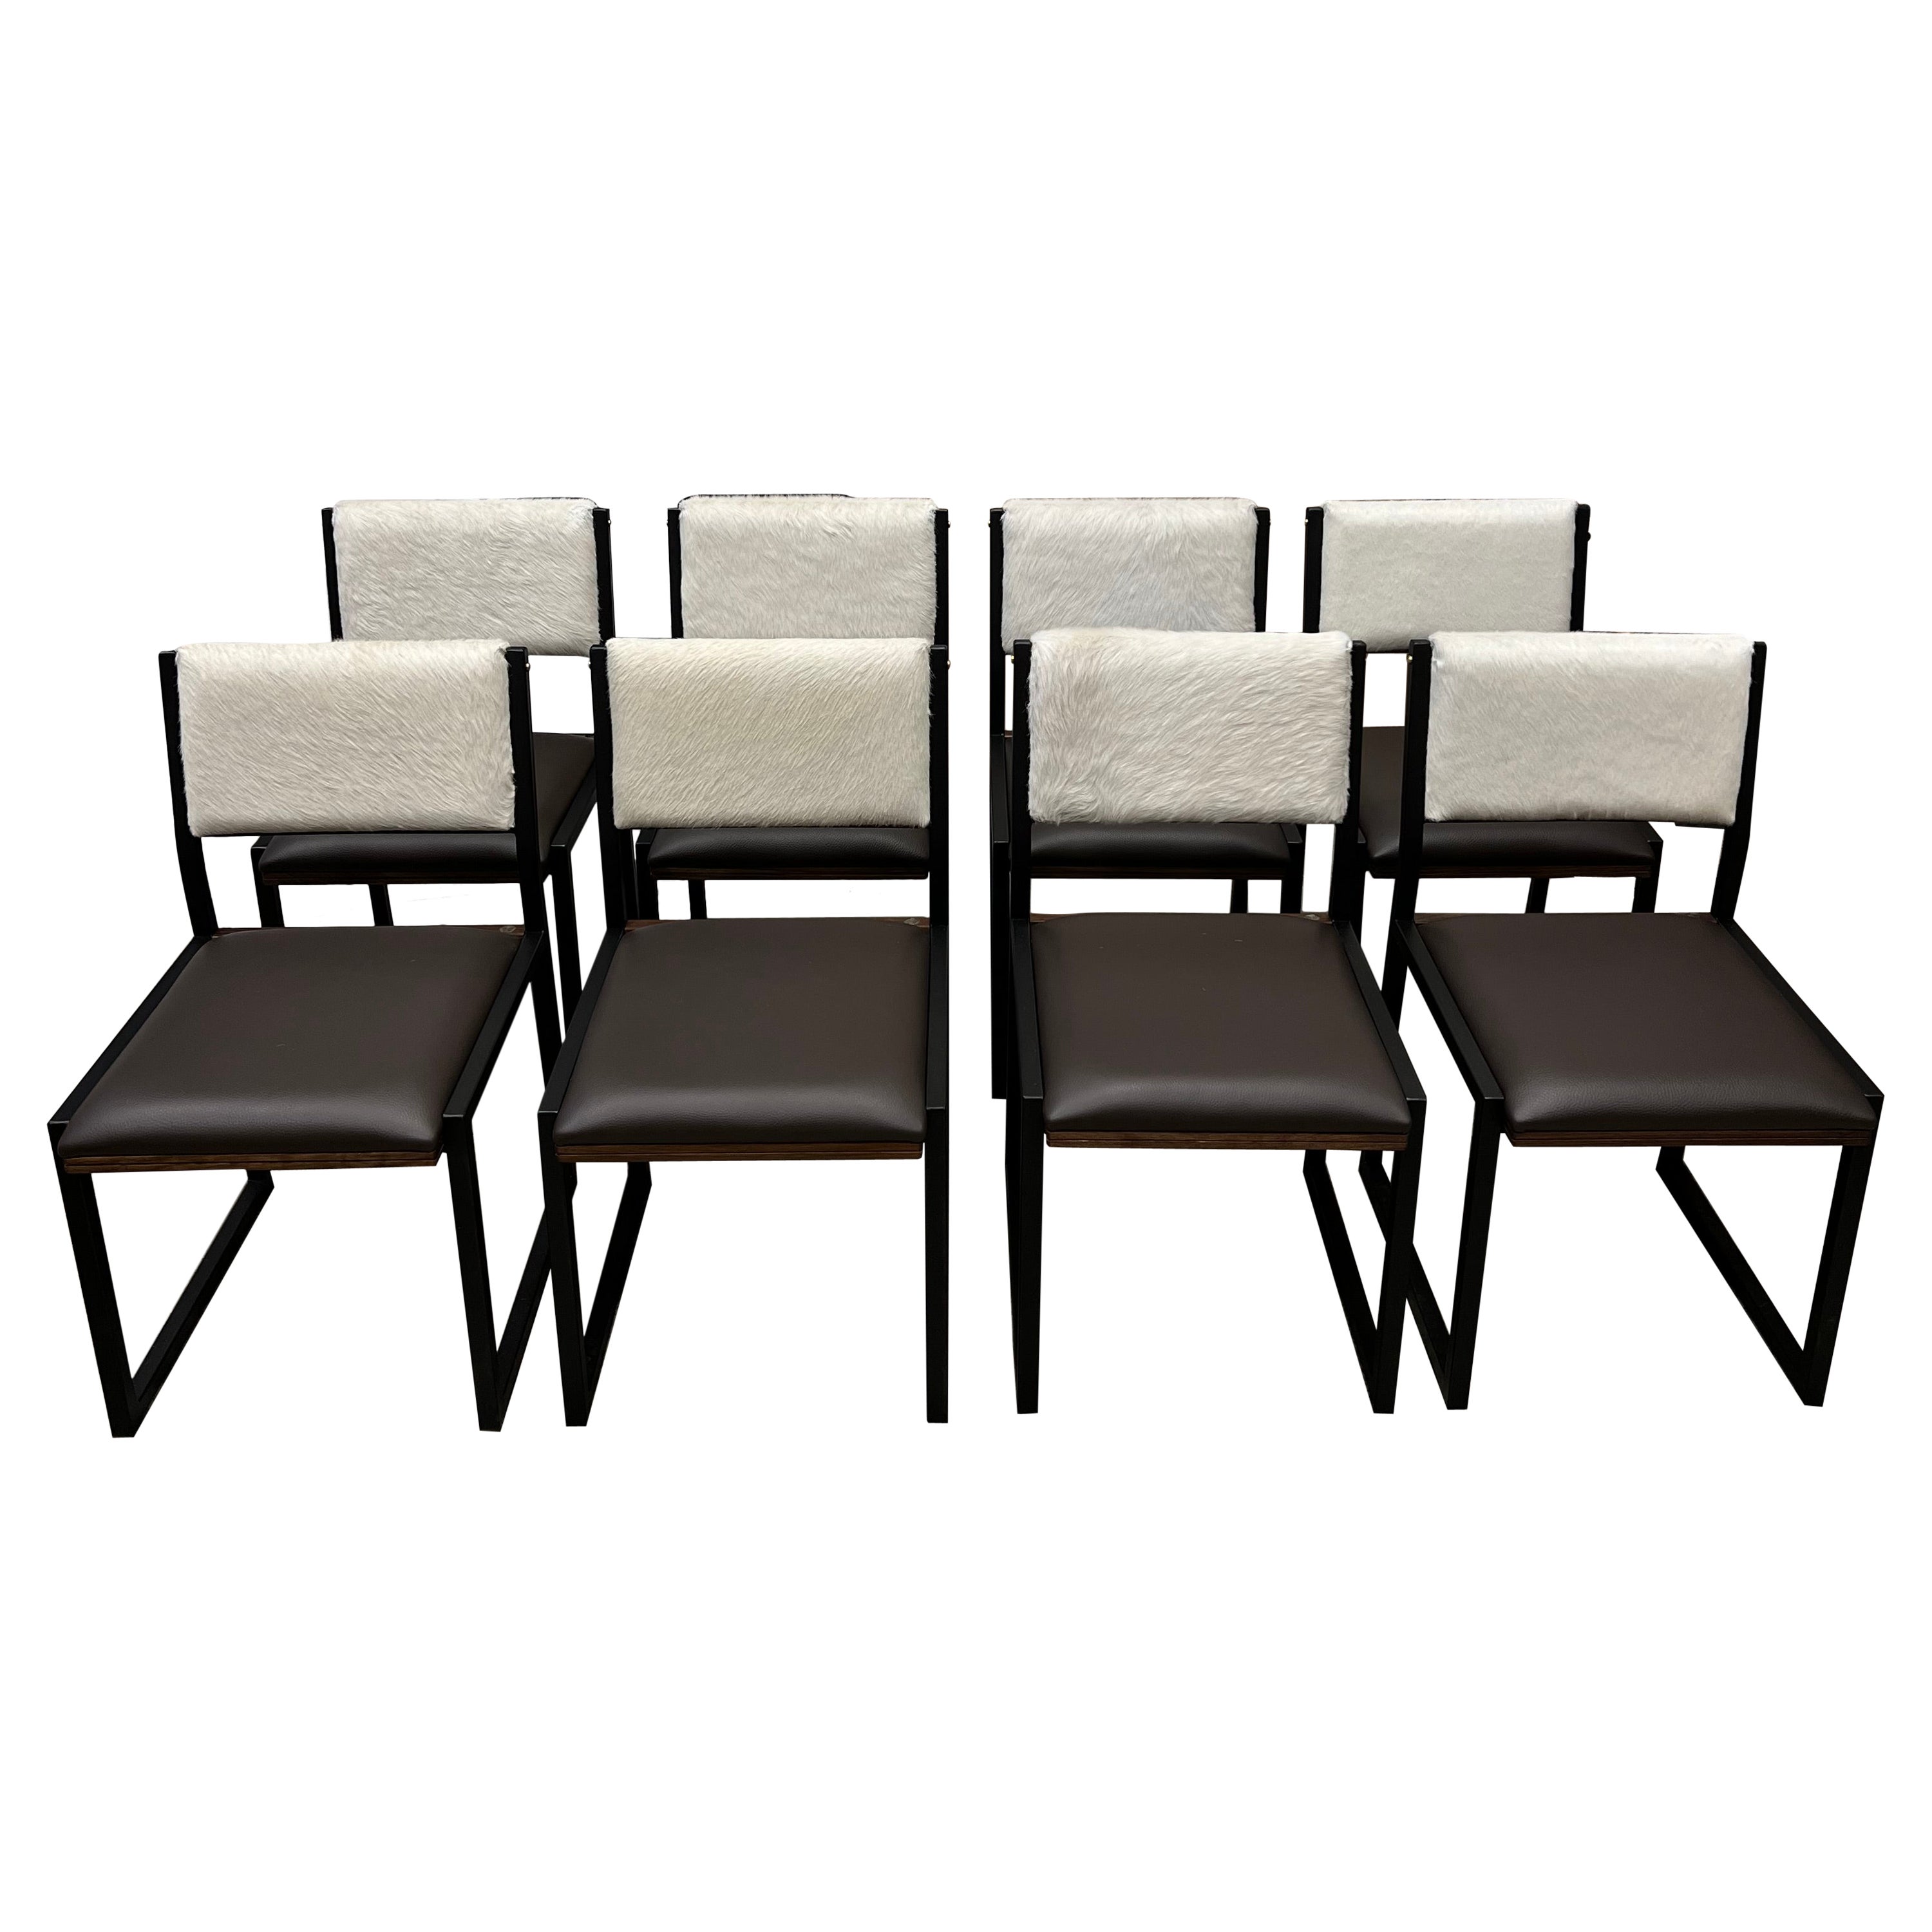 8x Shaker Modern Chairs by Ambrozia, Walnut, Dark Brown Leather, White Cowhide For Sale